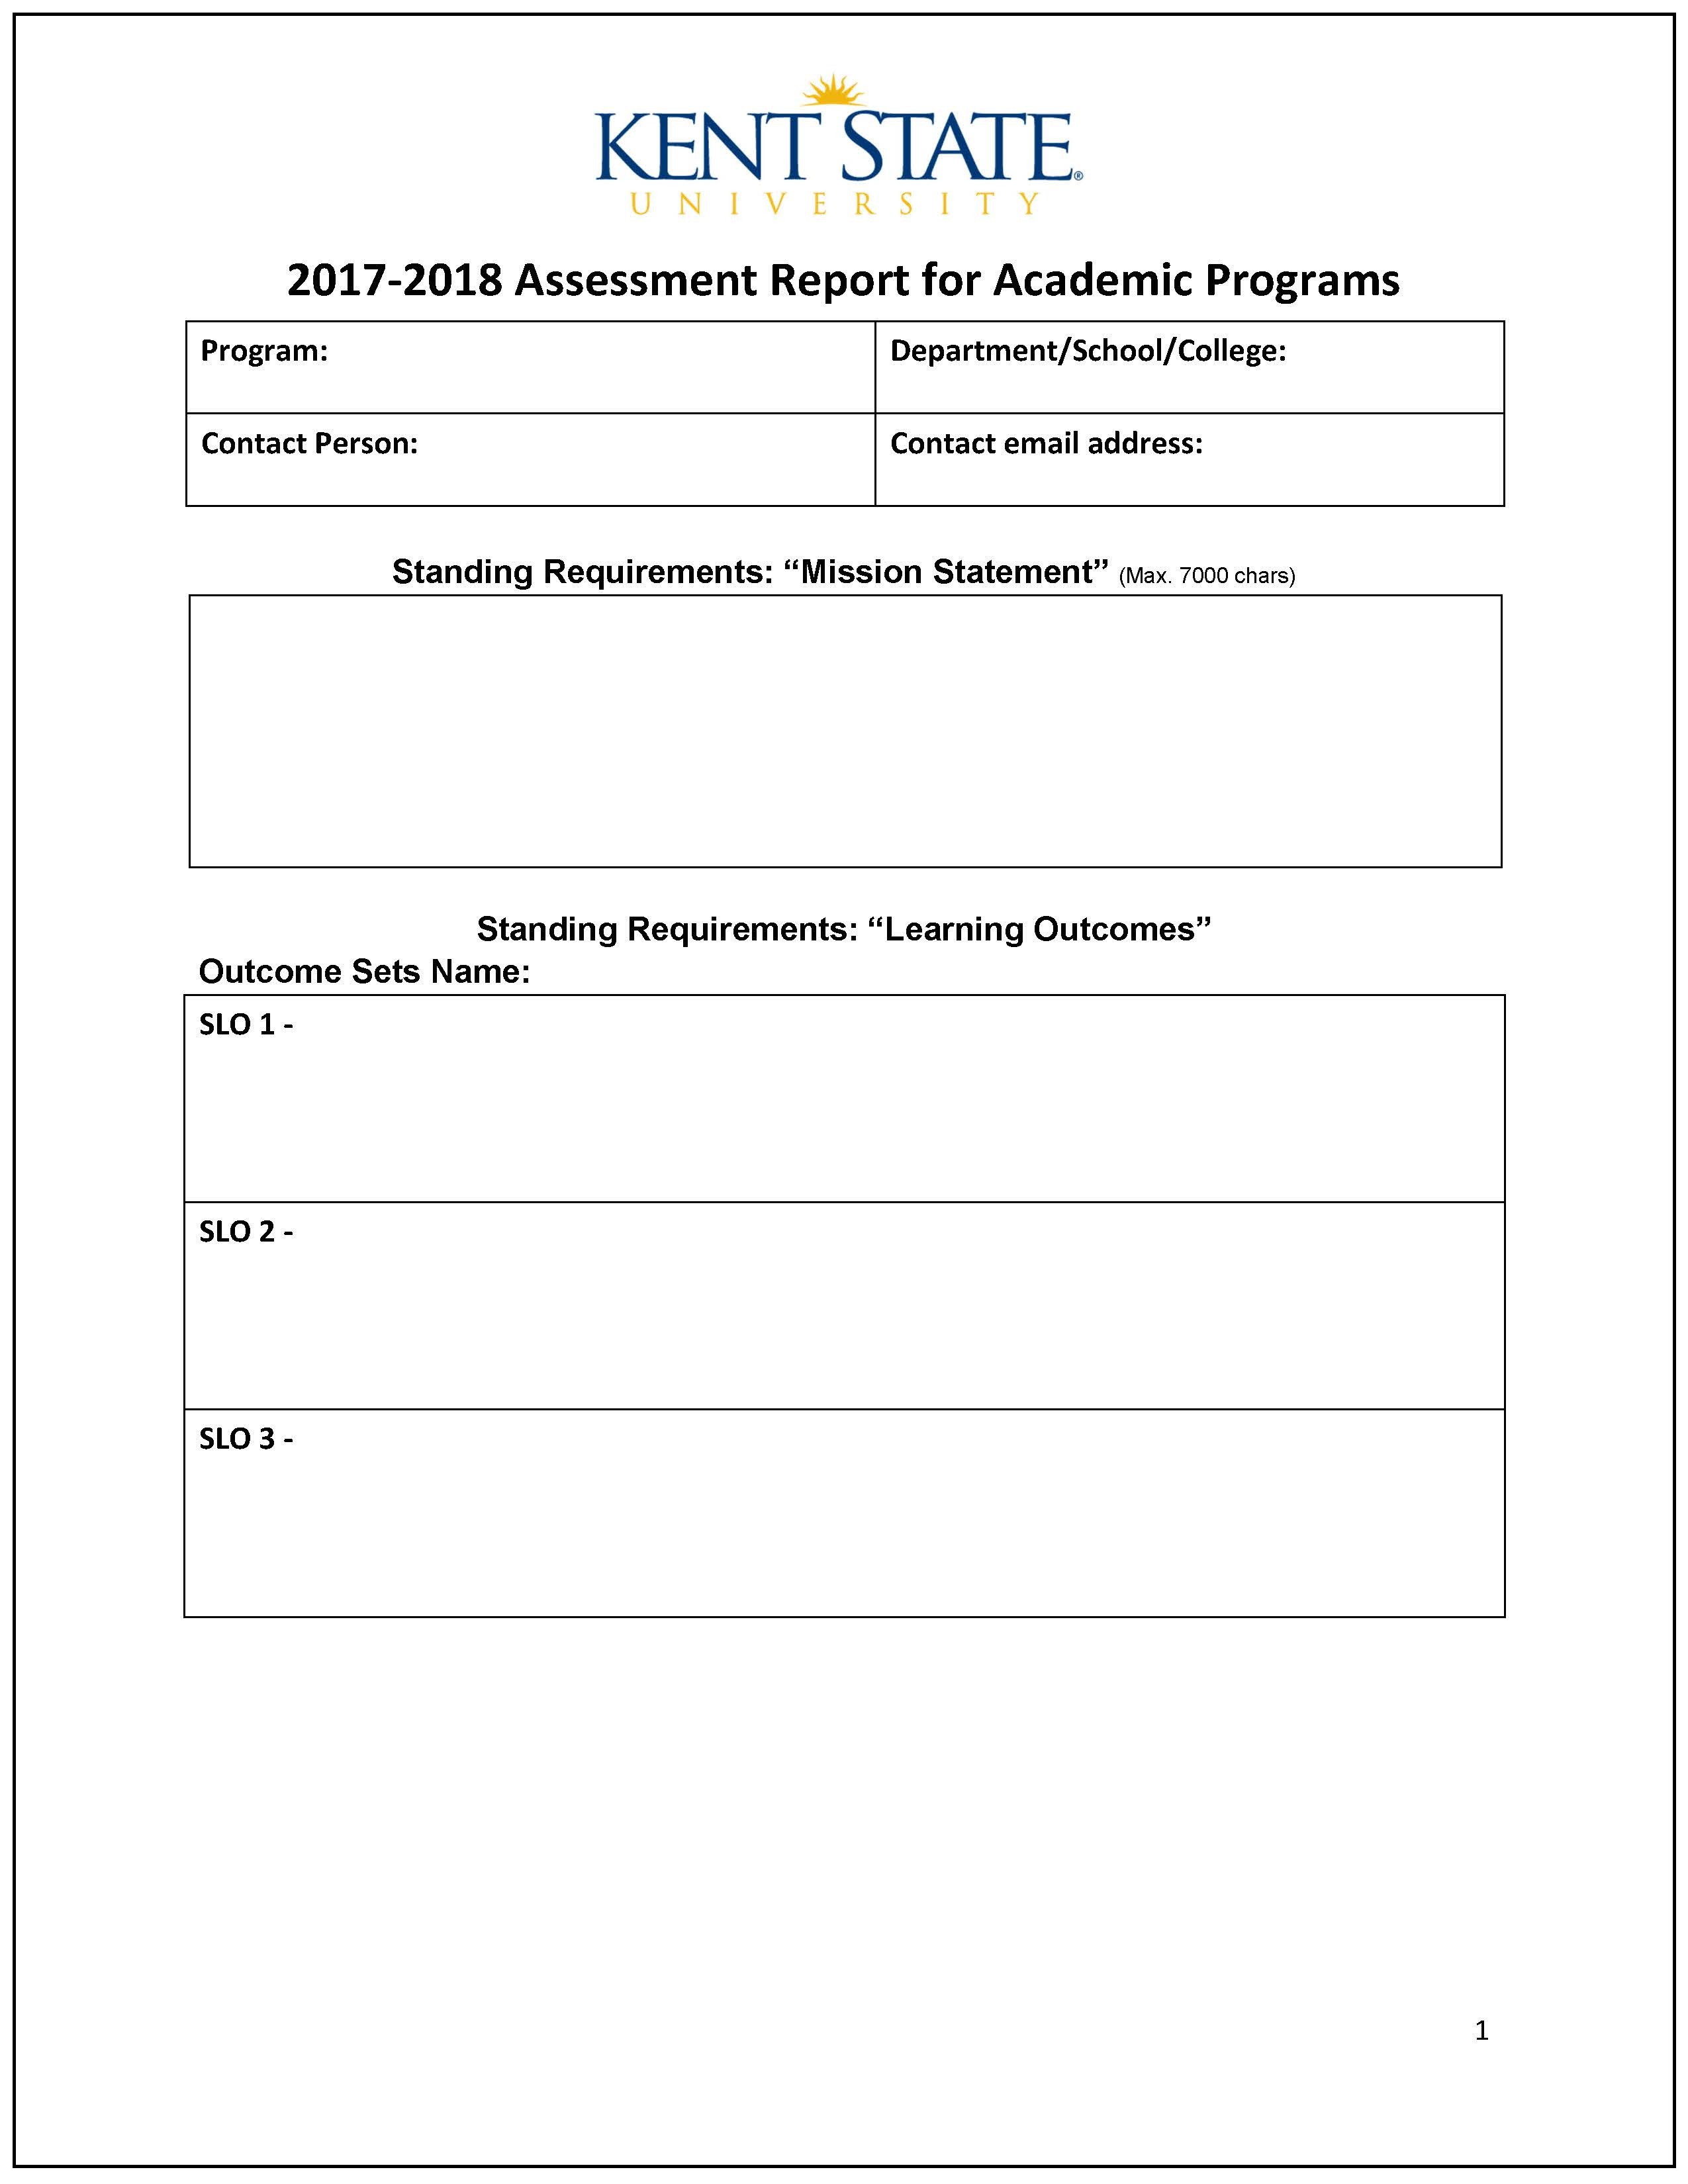 Assessment Report – Word Template | Accreditation Inside It Report Template For Word